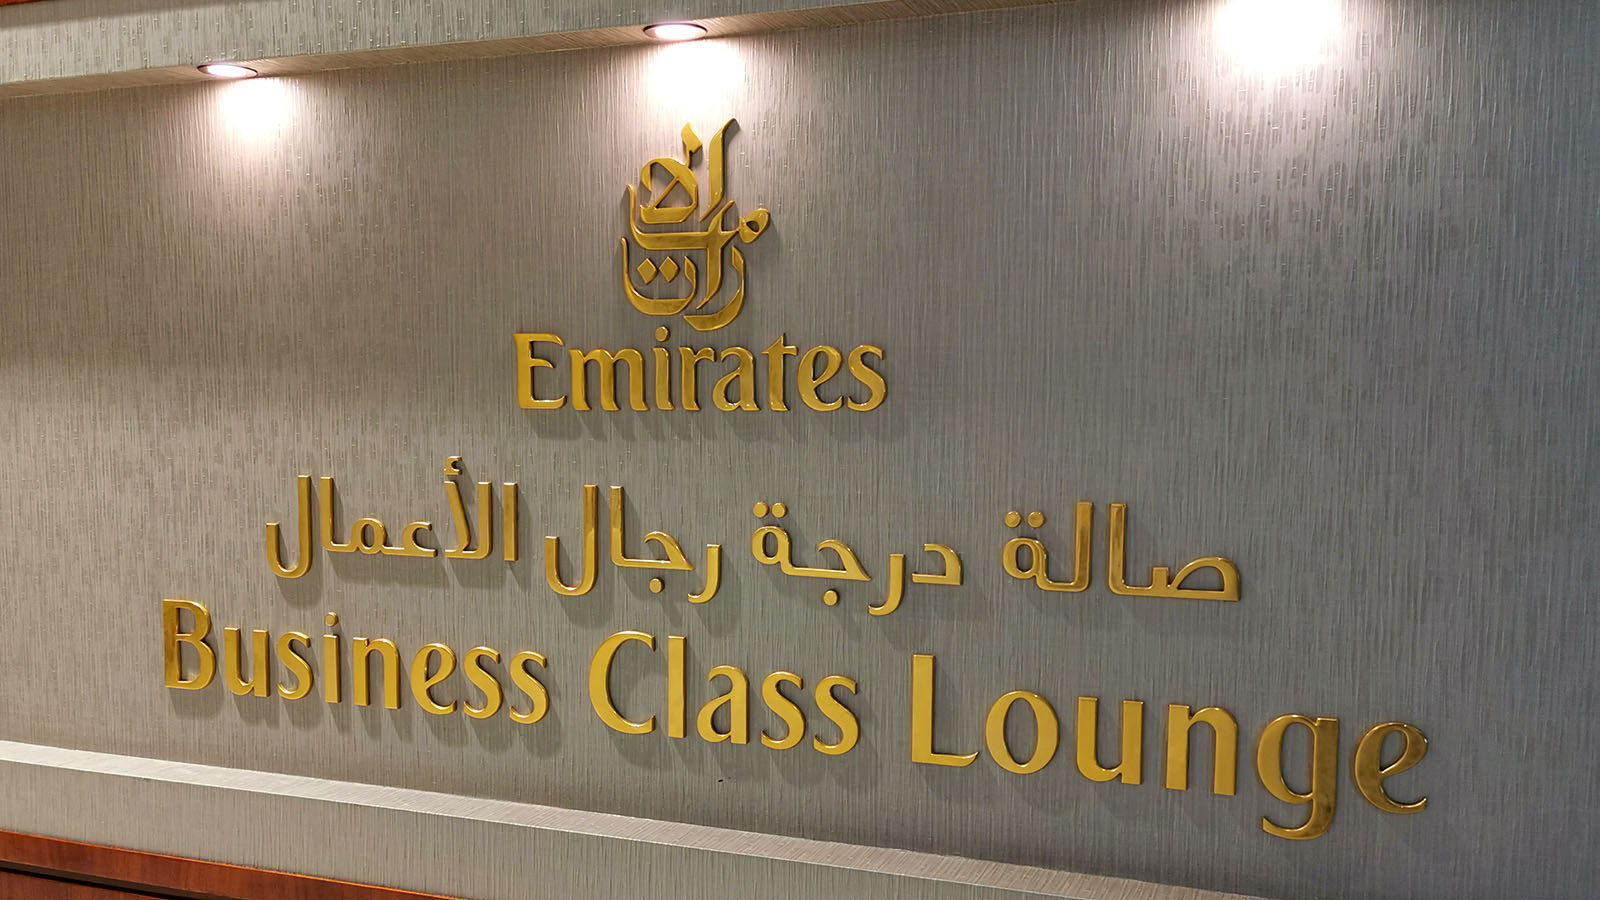 Sign for the Emirates Business Class Lounge Dubai T3, Concourse B